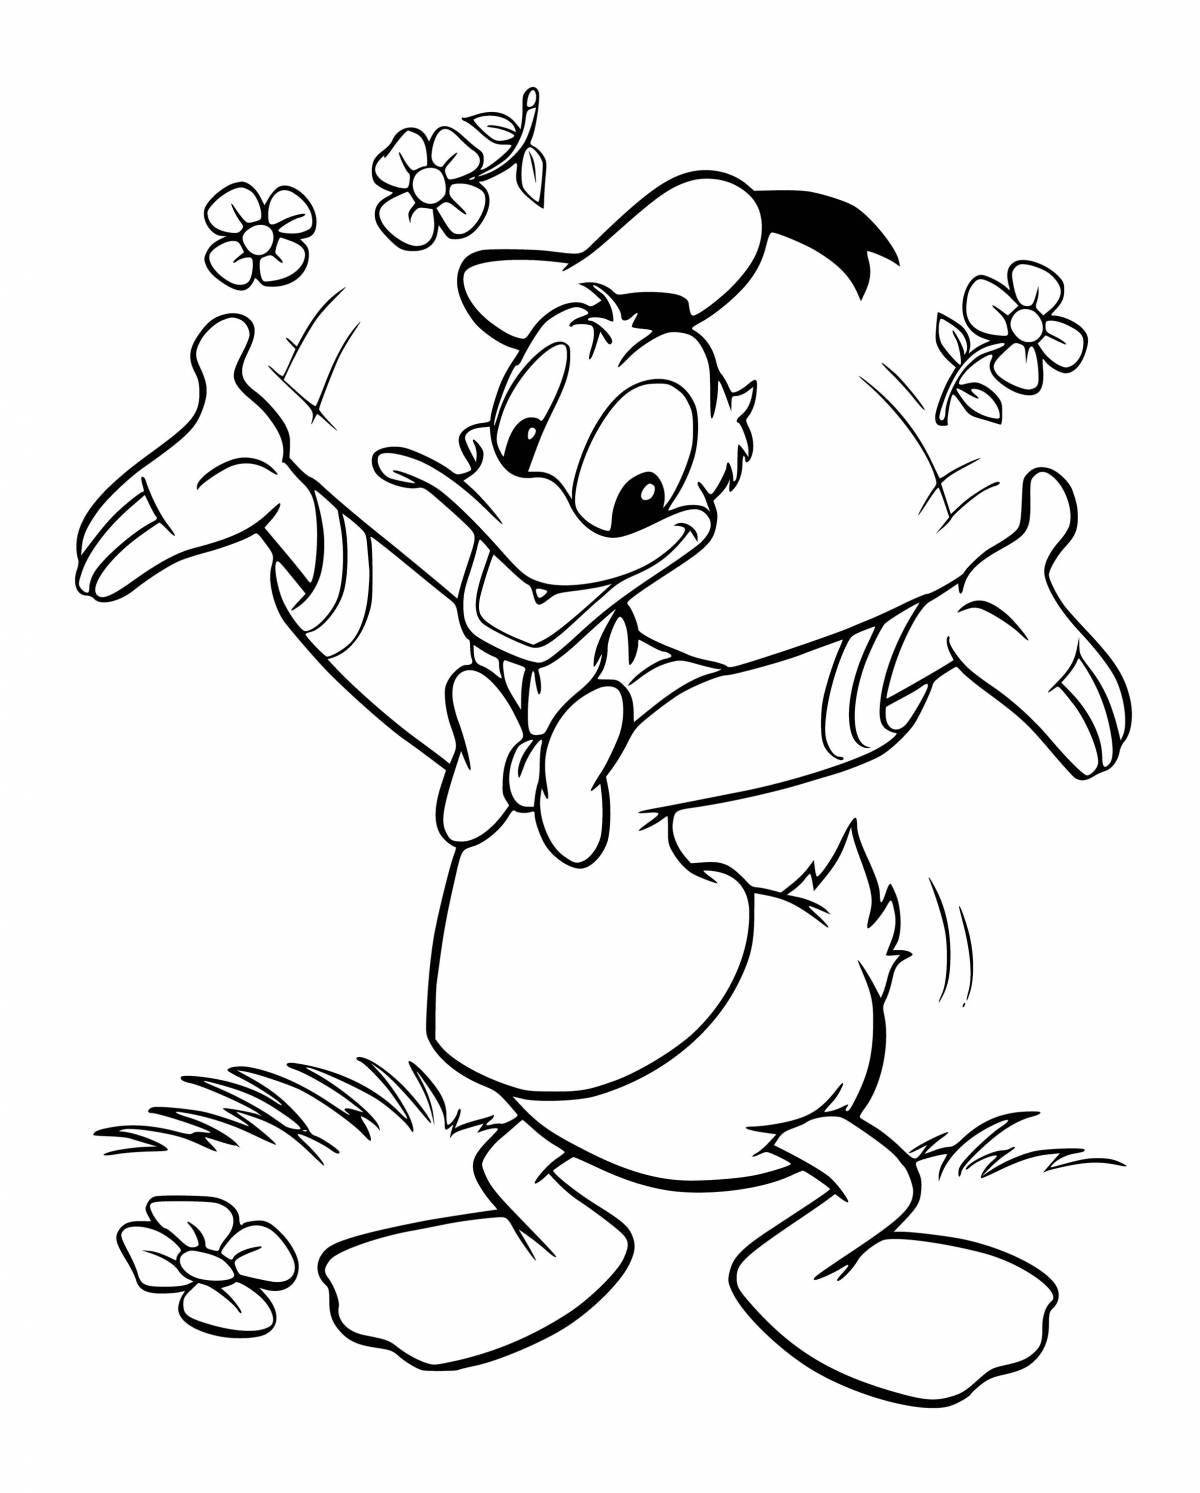 Colorful cartoon character coloring page